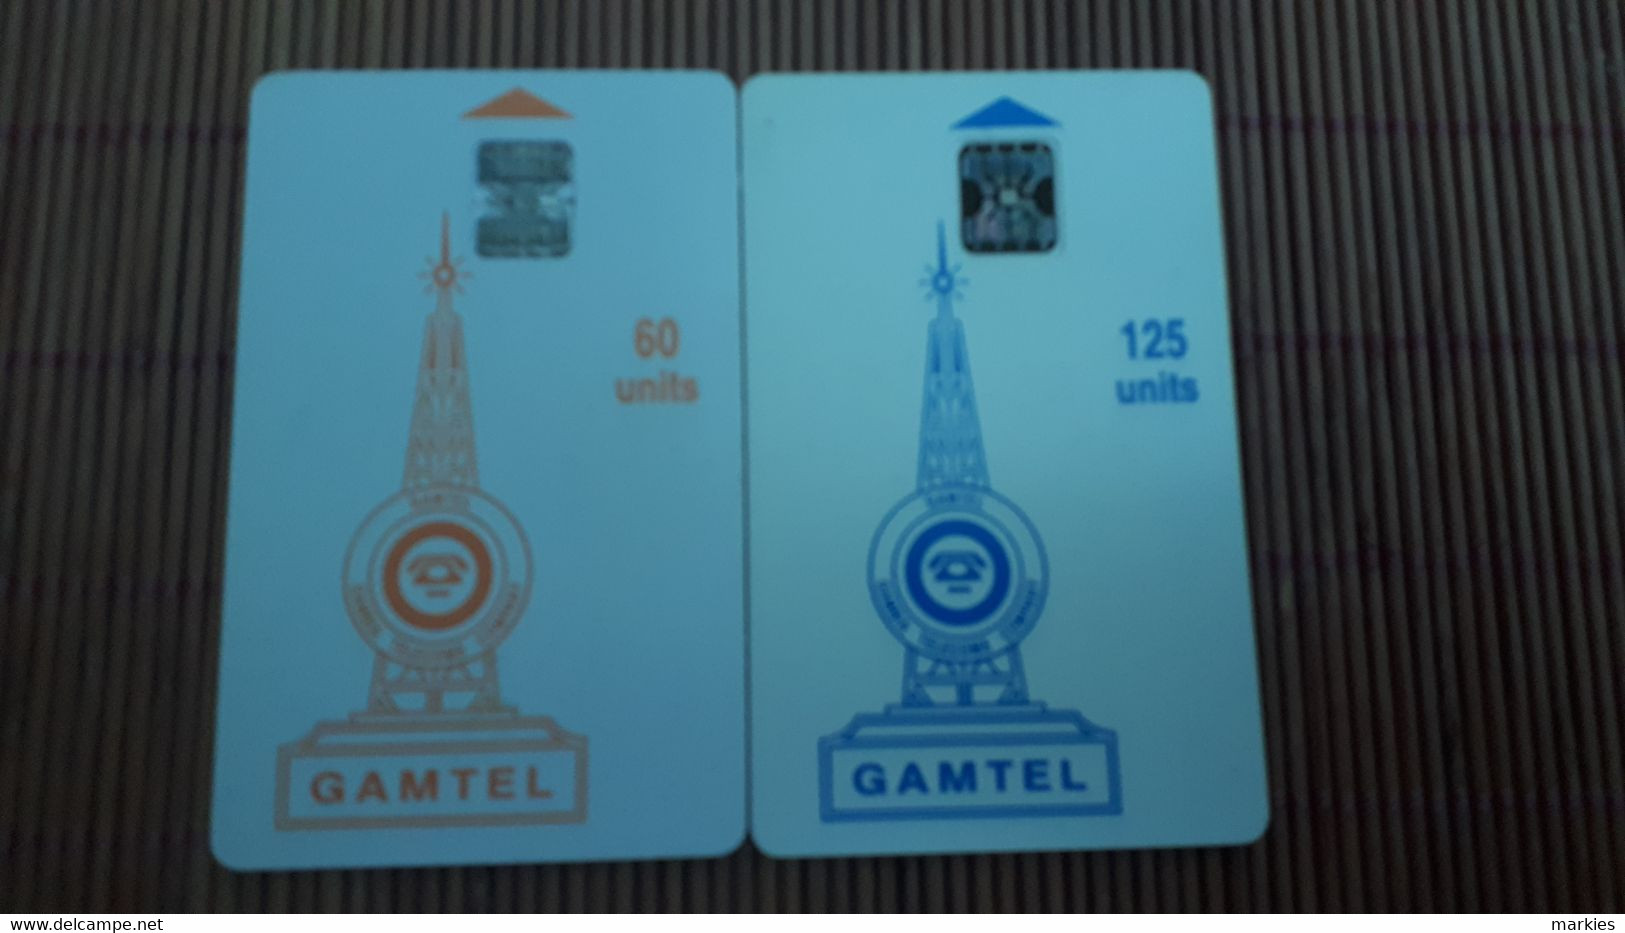 2 Phonecards Gambia 60 Units +125 Units Used Rare - Gambie